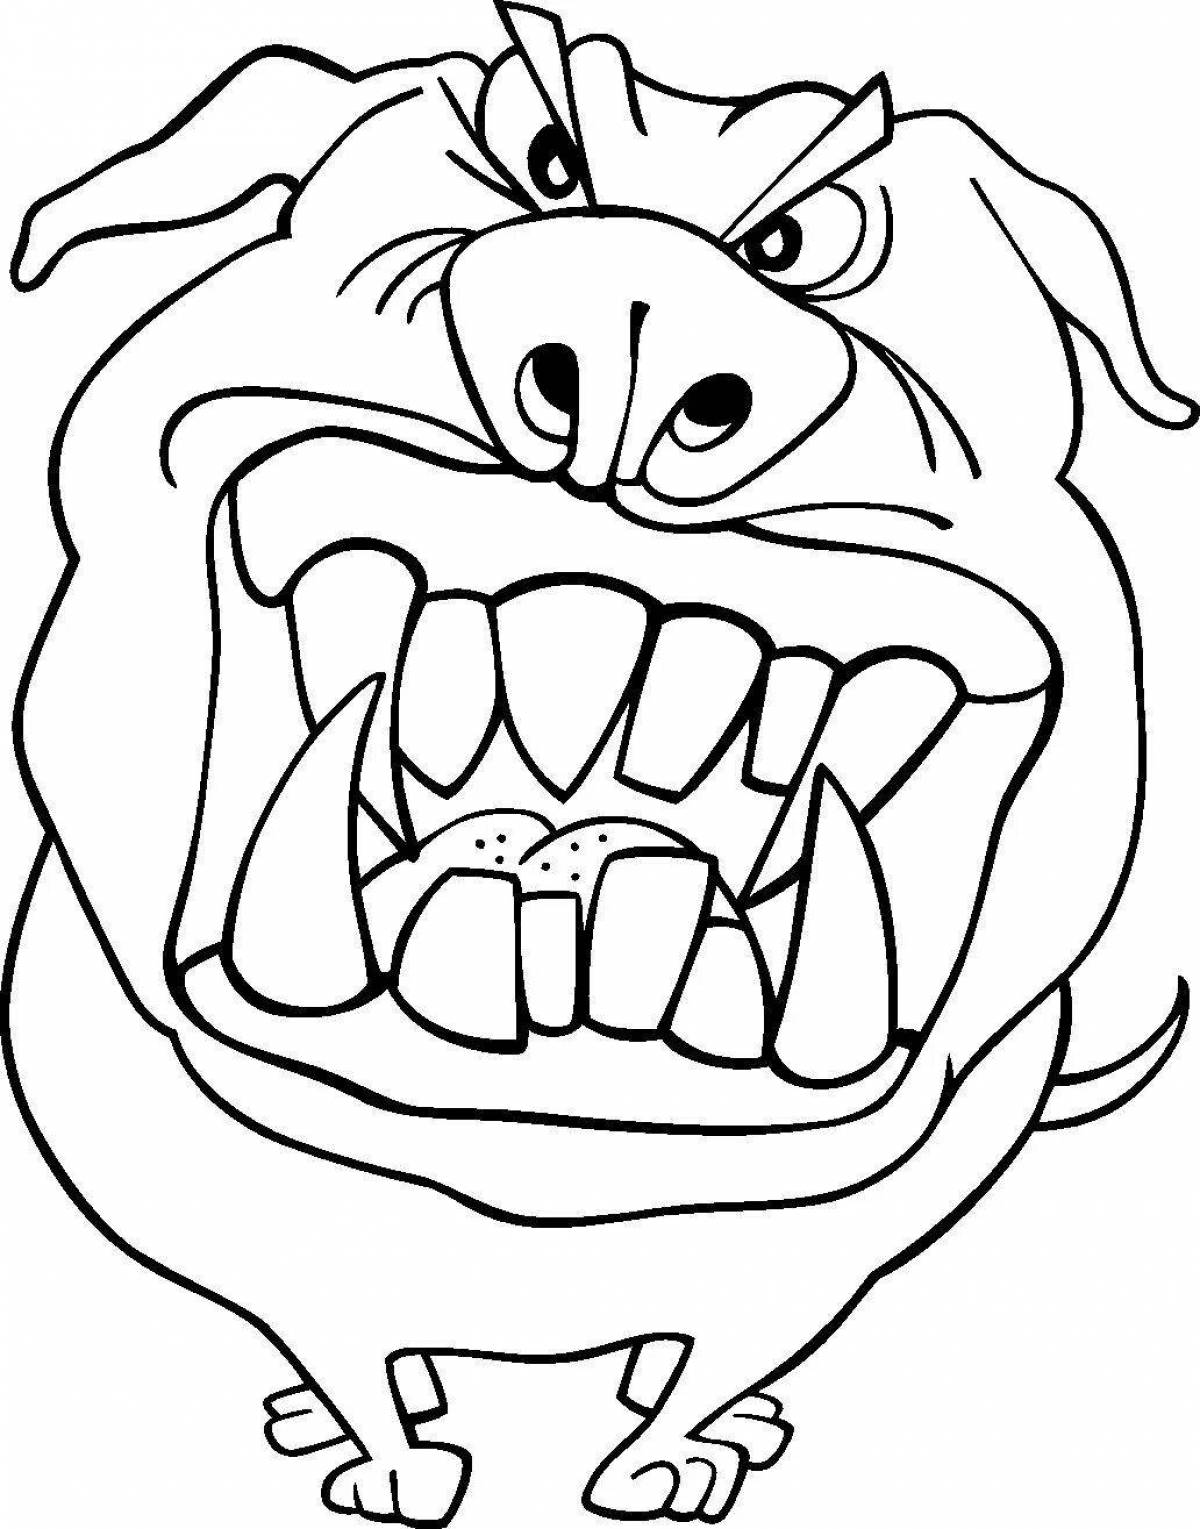 Happy joke coloring pages